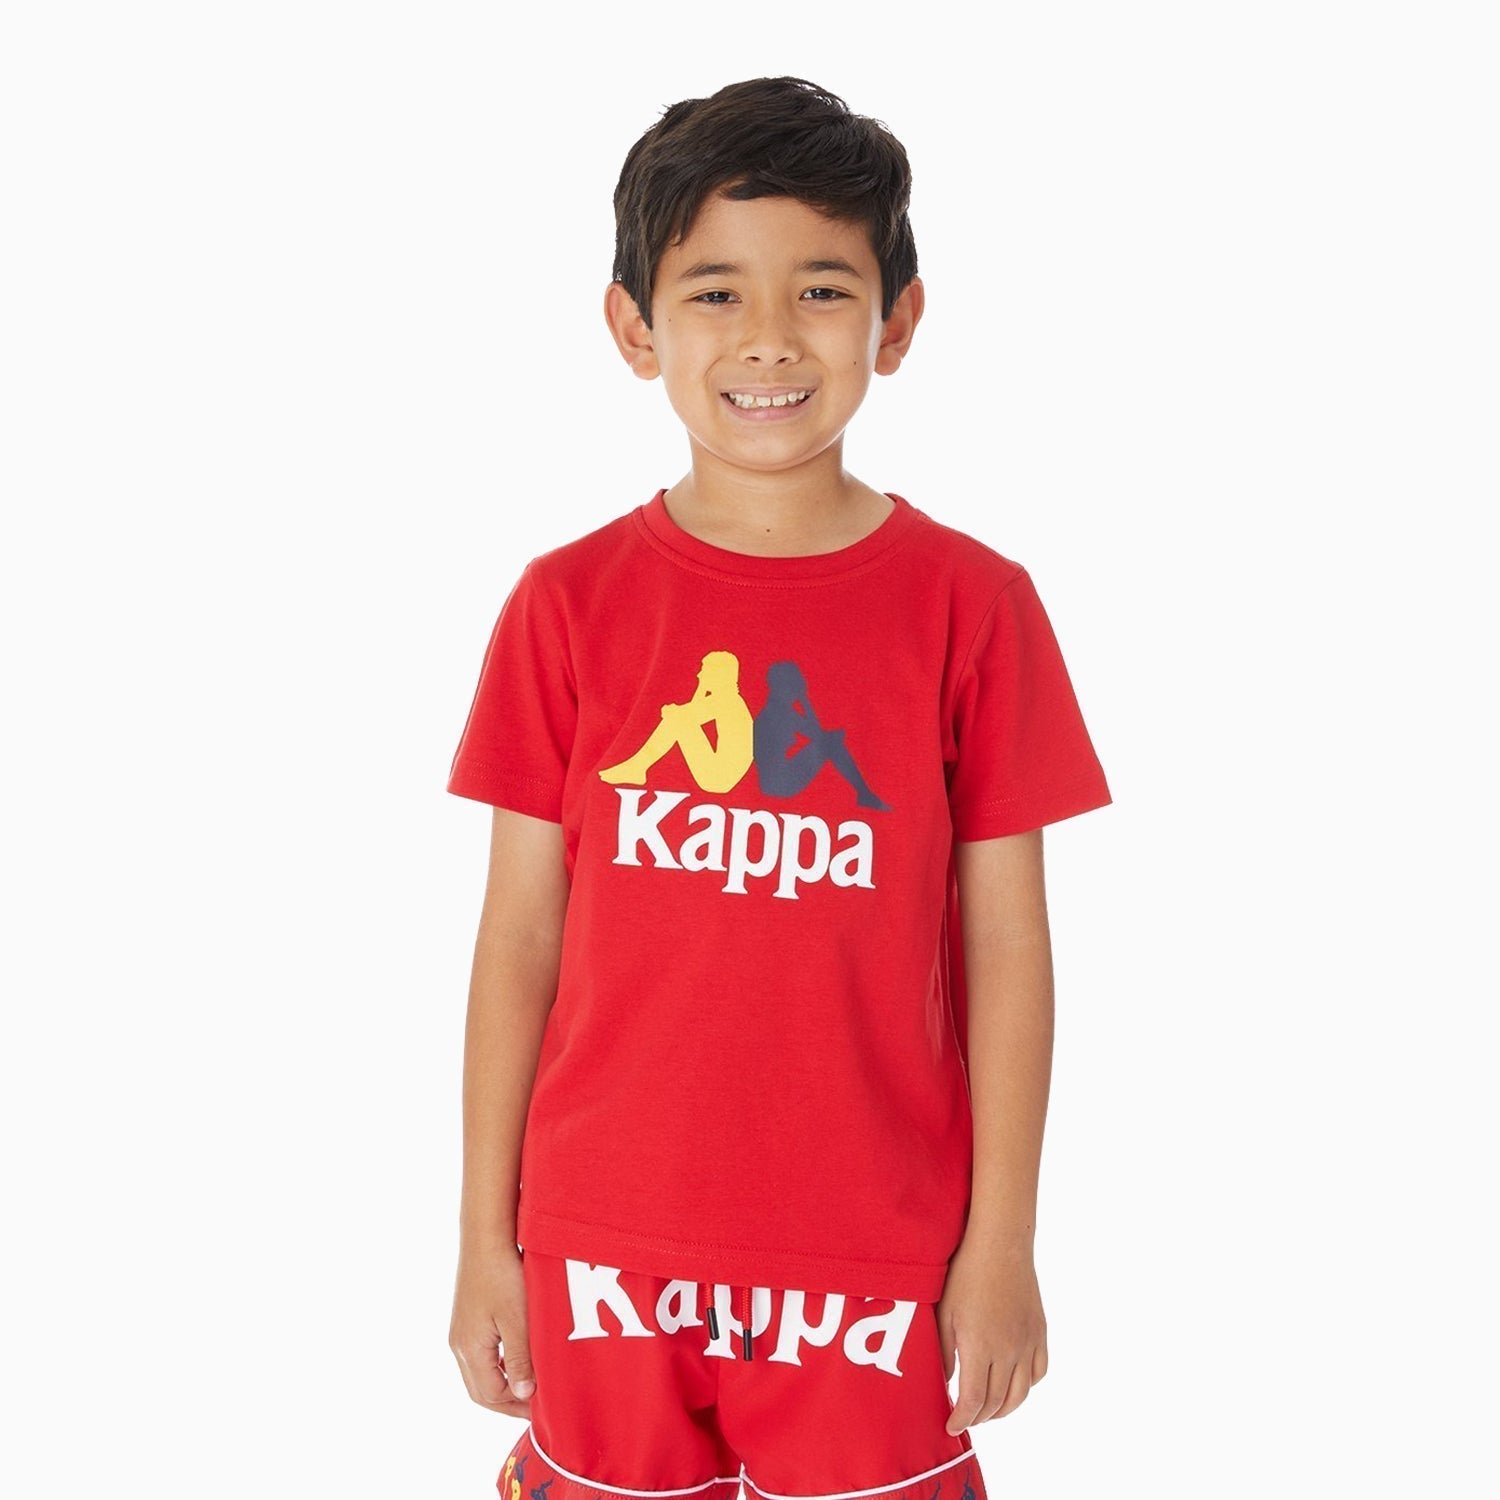 Kappa Kid's Authentic Estessi Outfit - Color: RED YELLOW BLUE WHITE - Kids Premium Clothing -